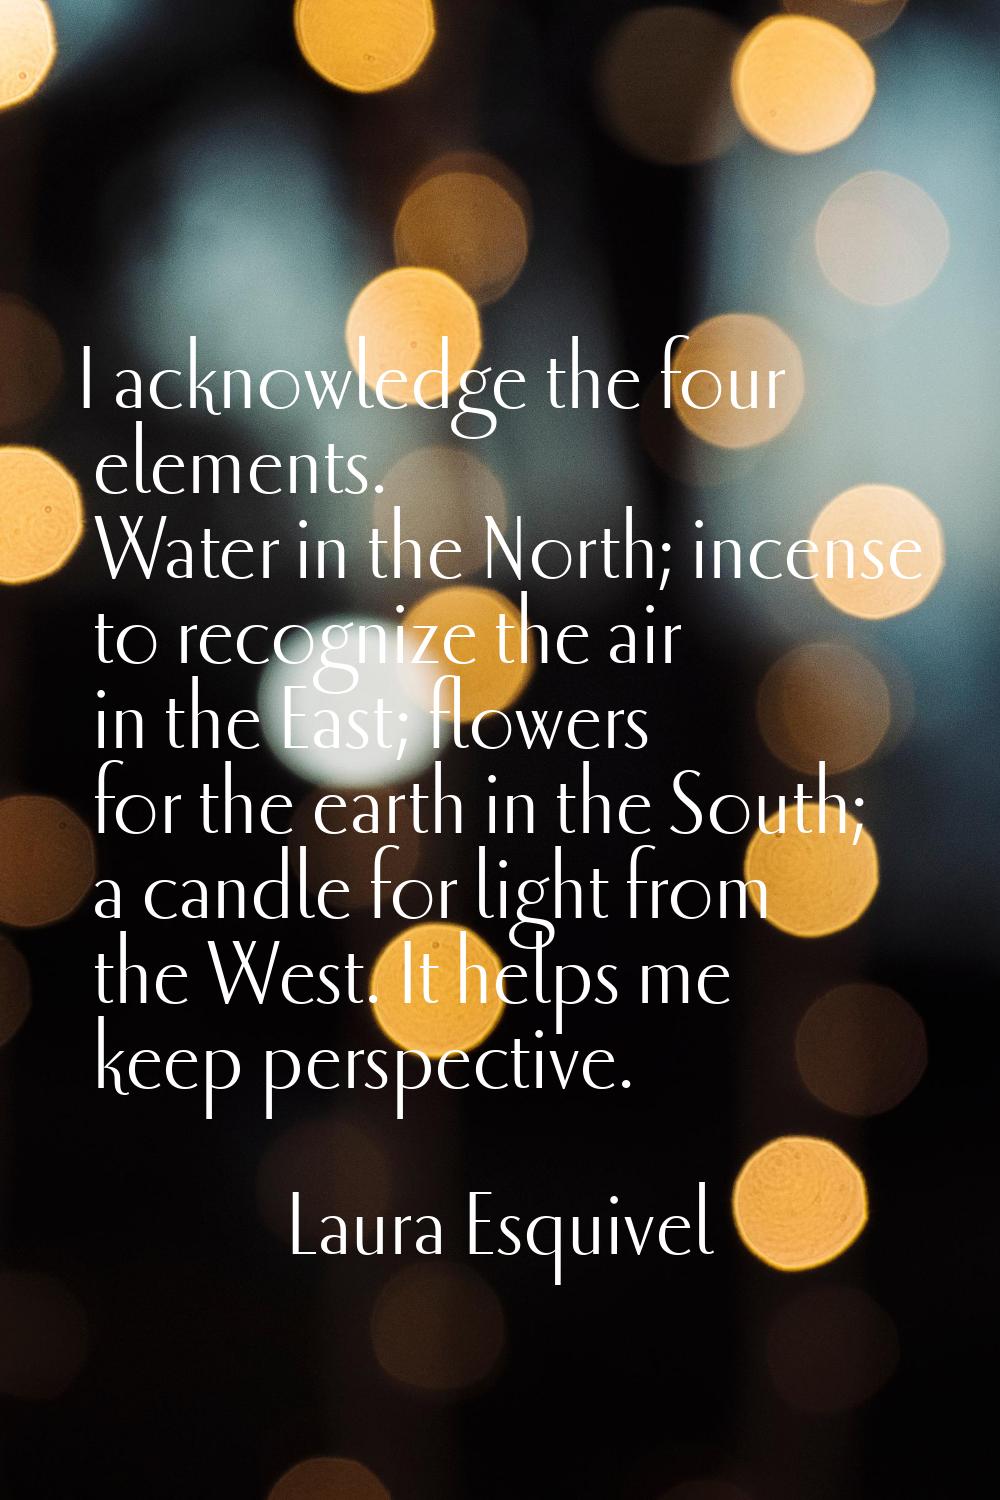 I acknowledge the four elements. Water in the North; incense to recognize the air in the East; flow